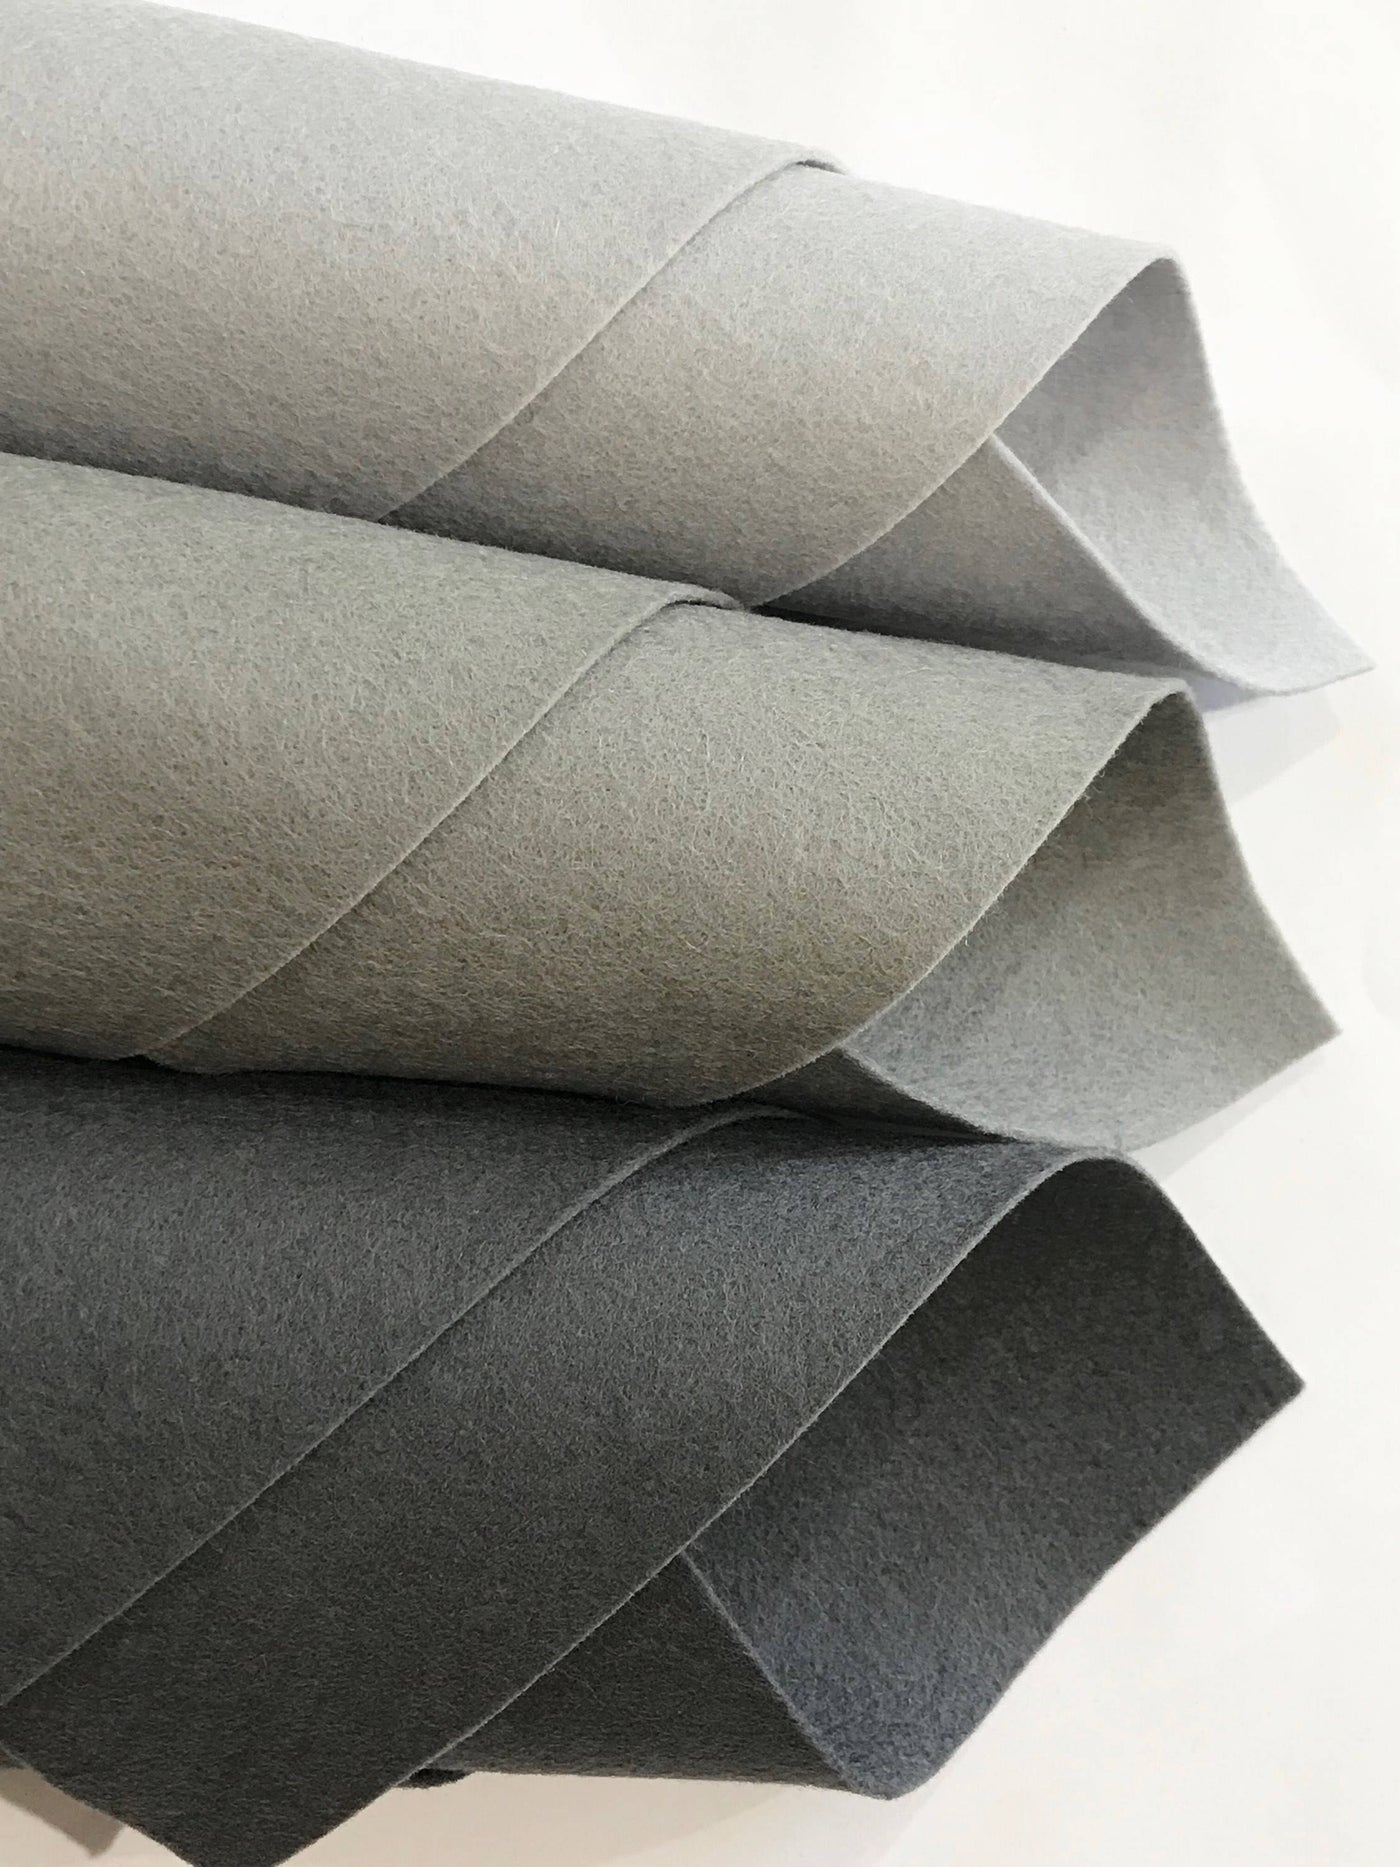 1mm Light Grey Merino Wool Felt No. 37 - Available in a range of 7 sizes